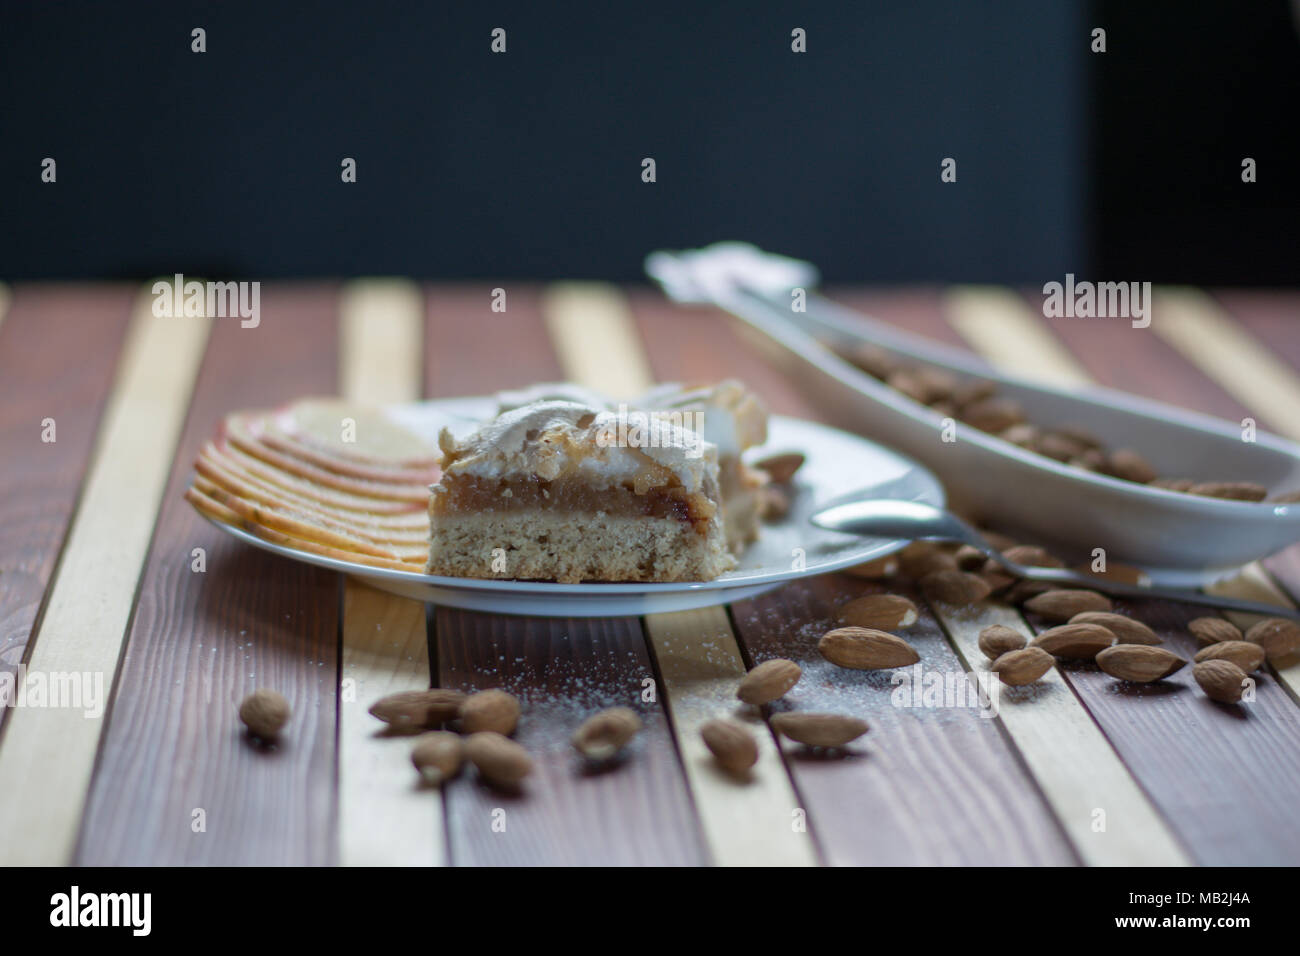 Square shape sliced omemade apple pie with kumquats and almonds on wooden background Stock Photo